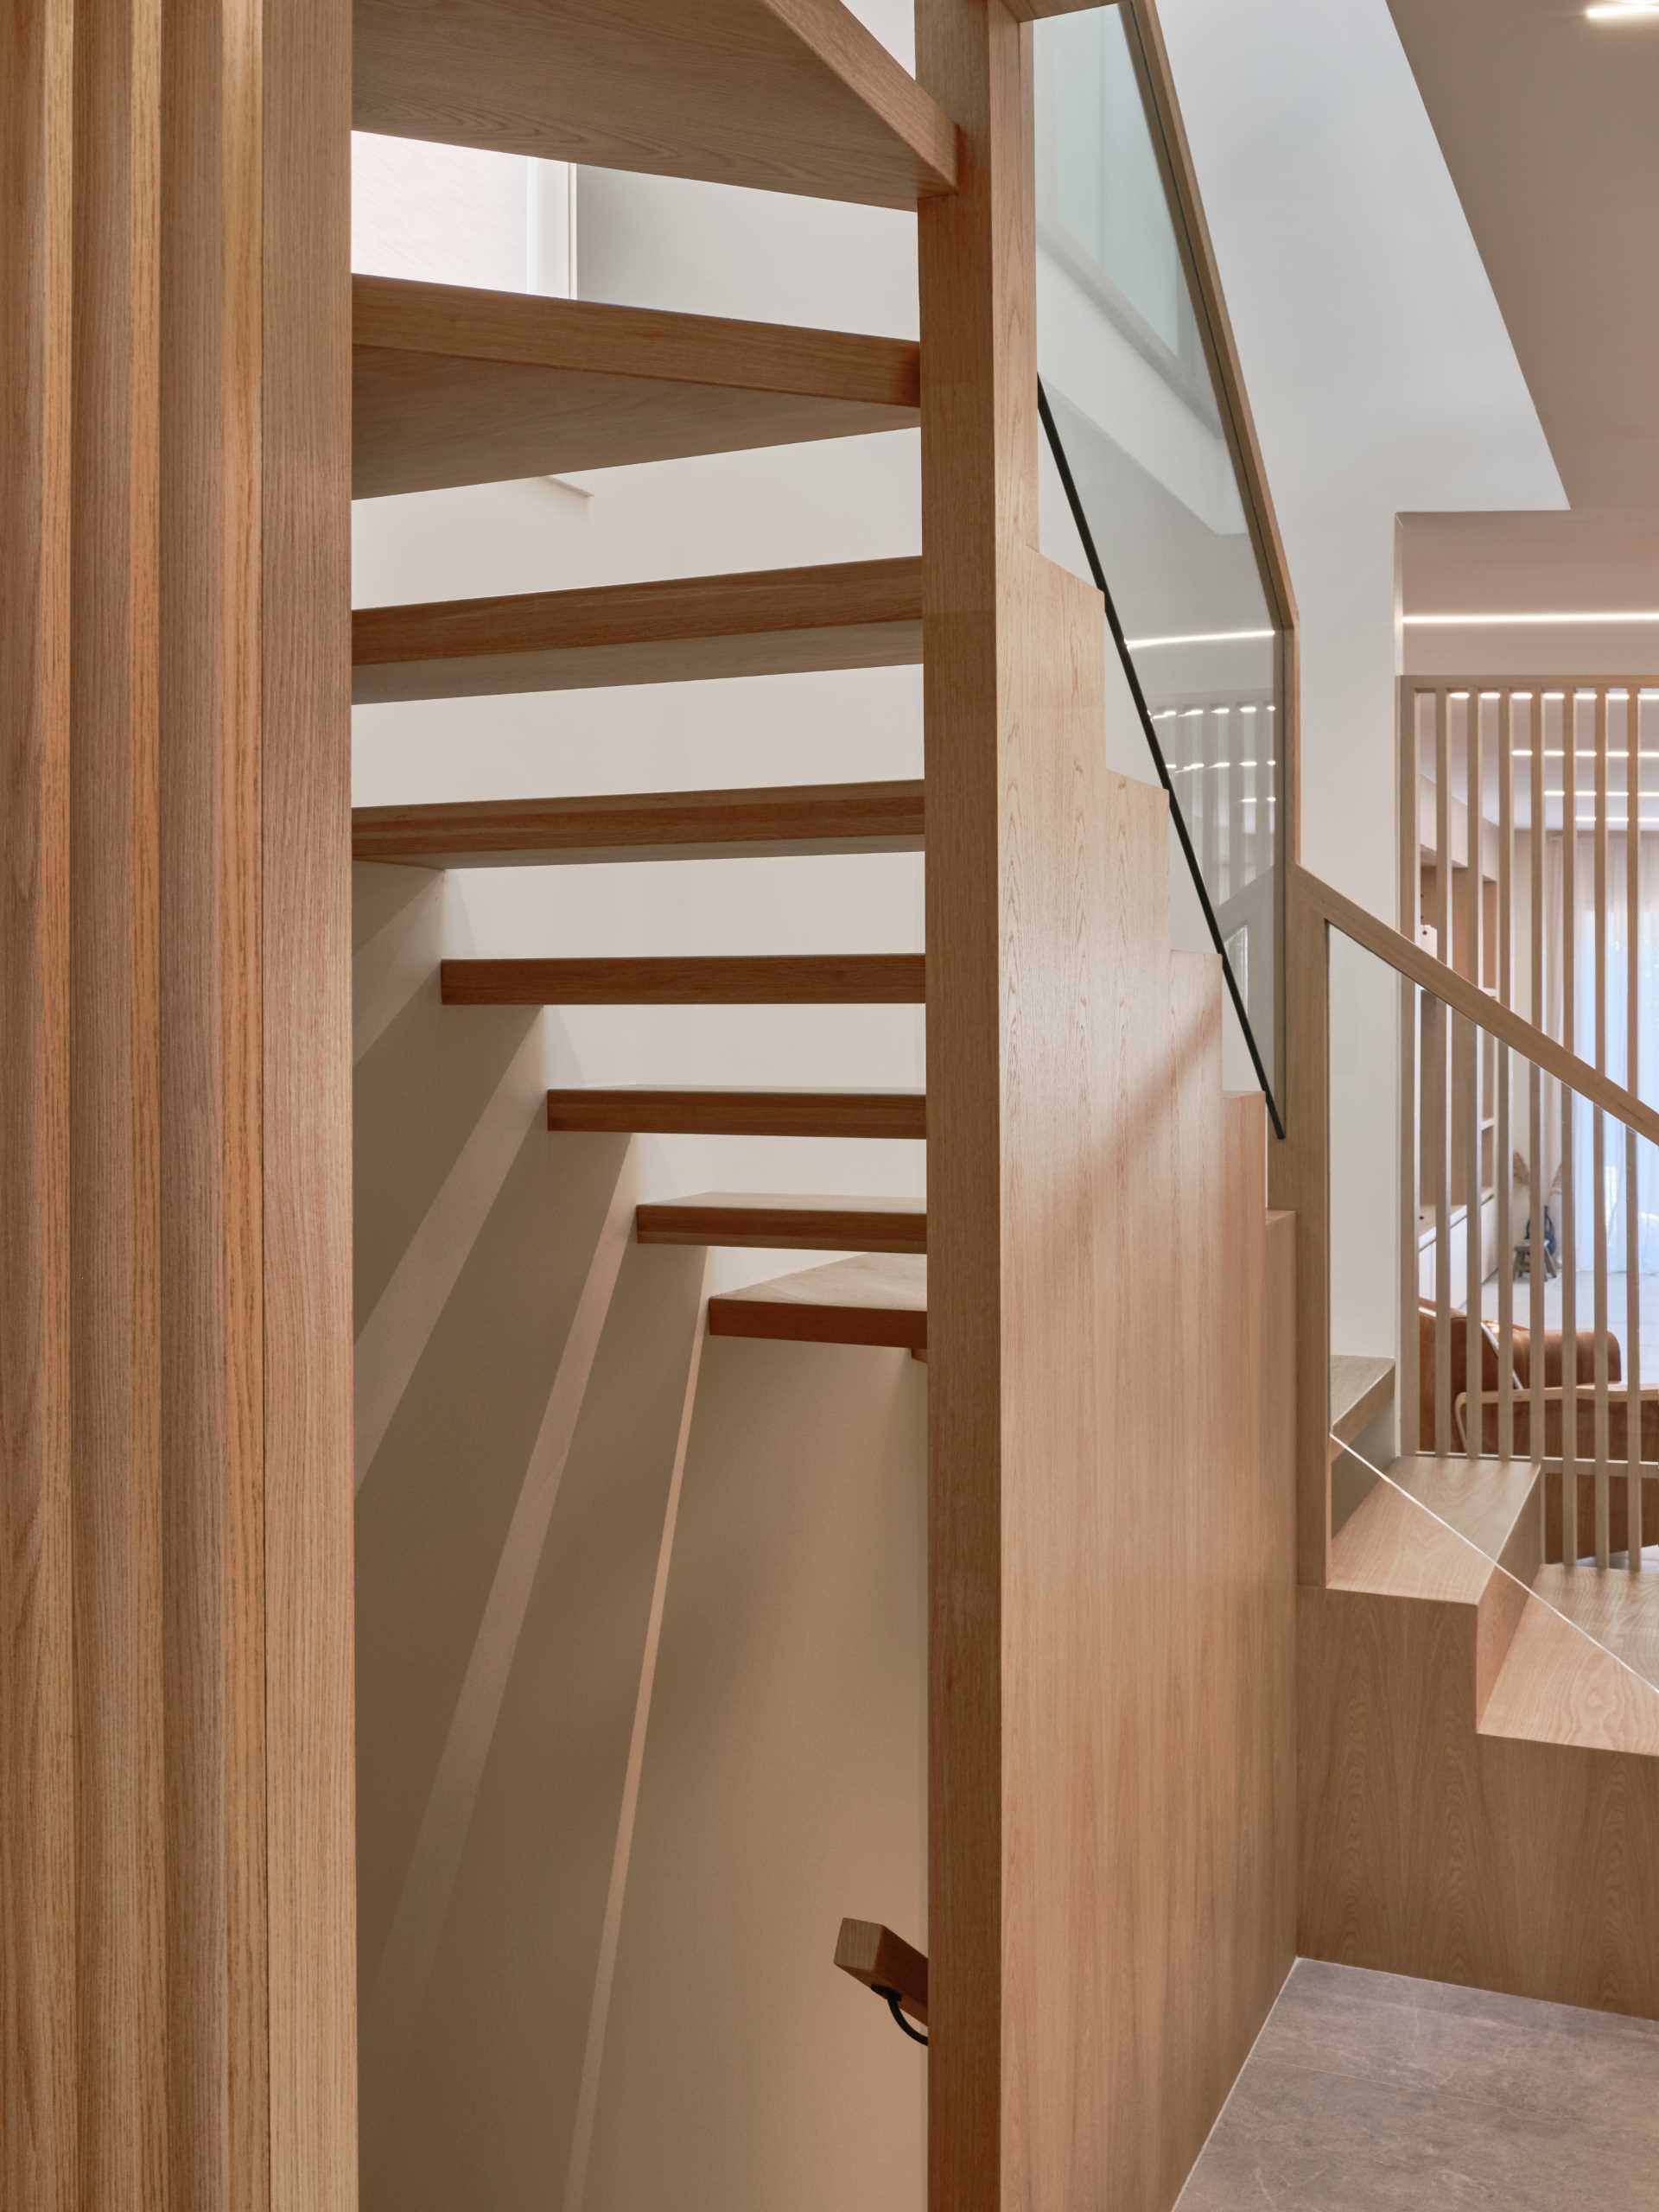 A floating staircase, which is by the foyer, combines wood and glass, while the wood panel stair wall not only acts as a privacy panel that marries the structural support of the stair but also captures the shadows casting off the steps.